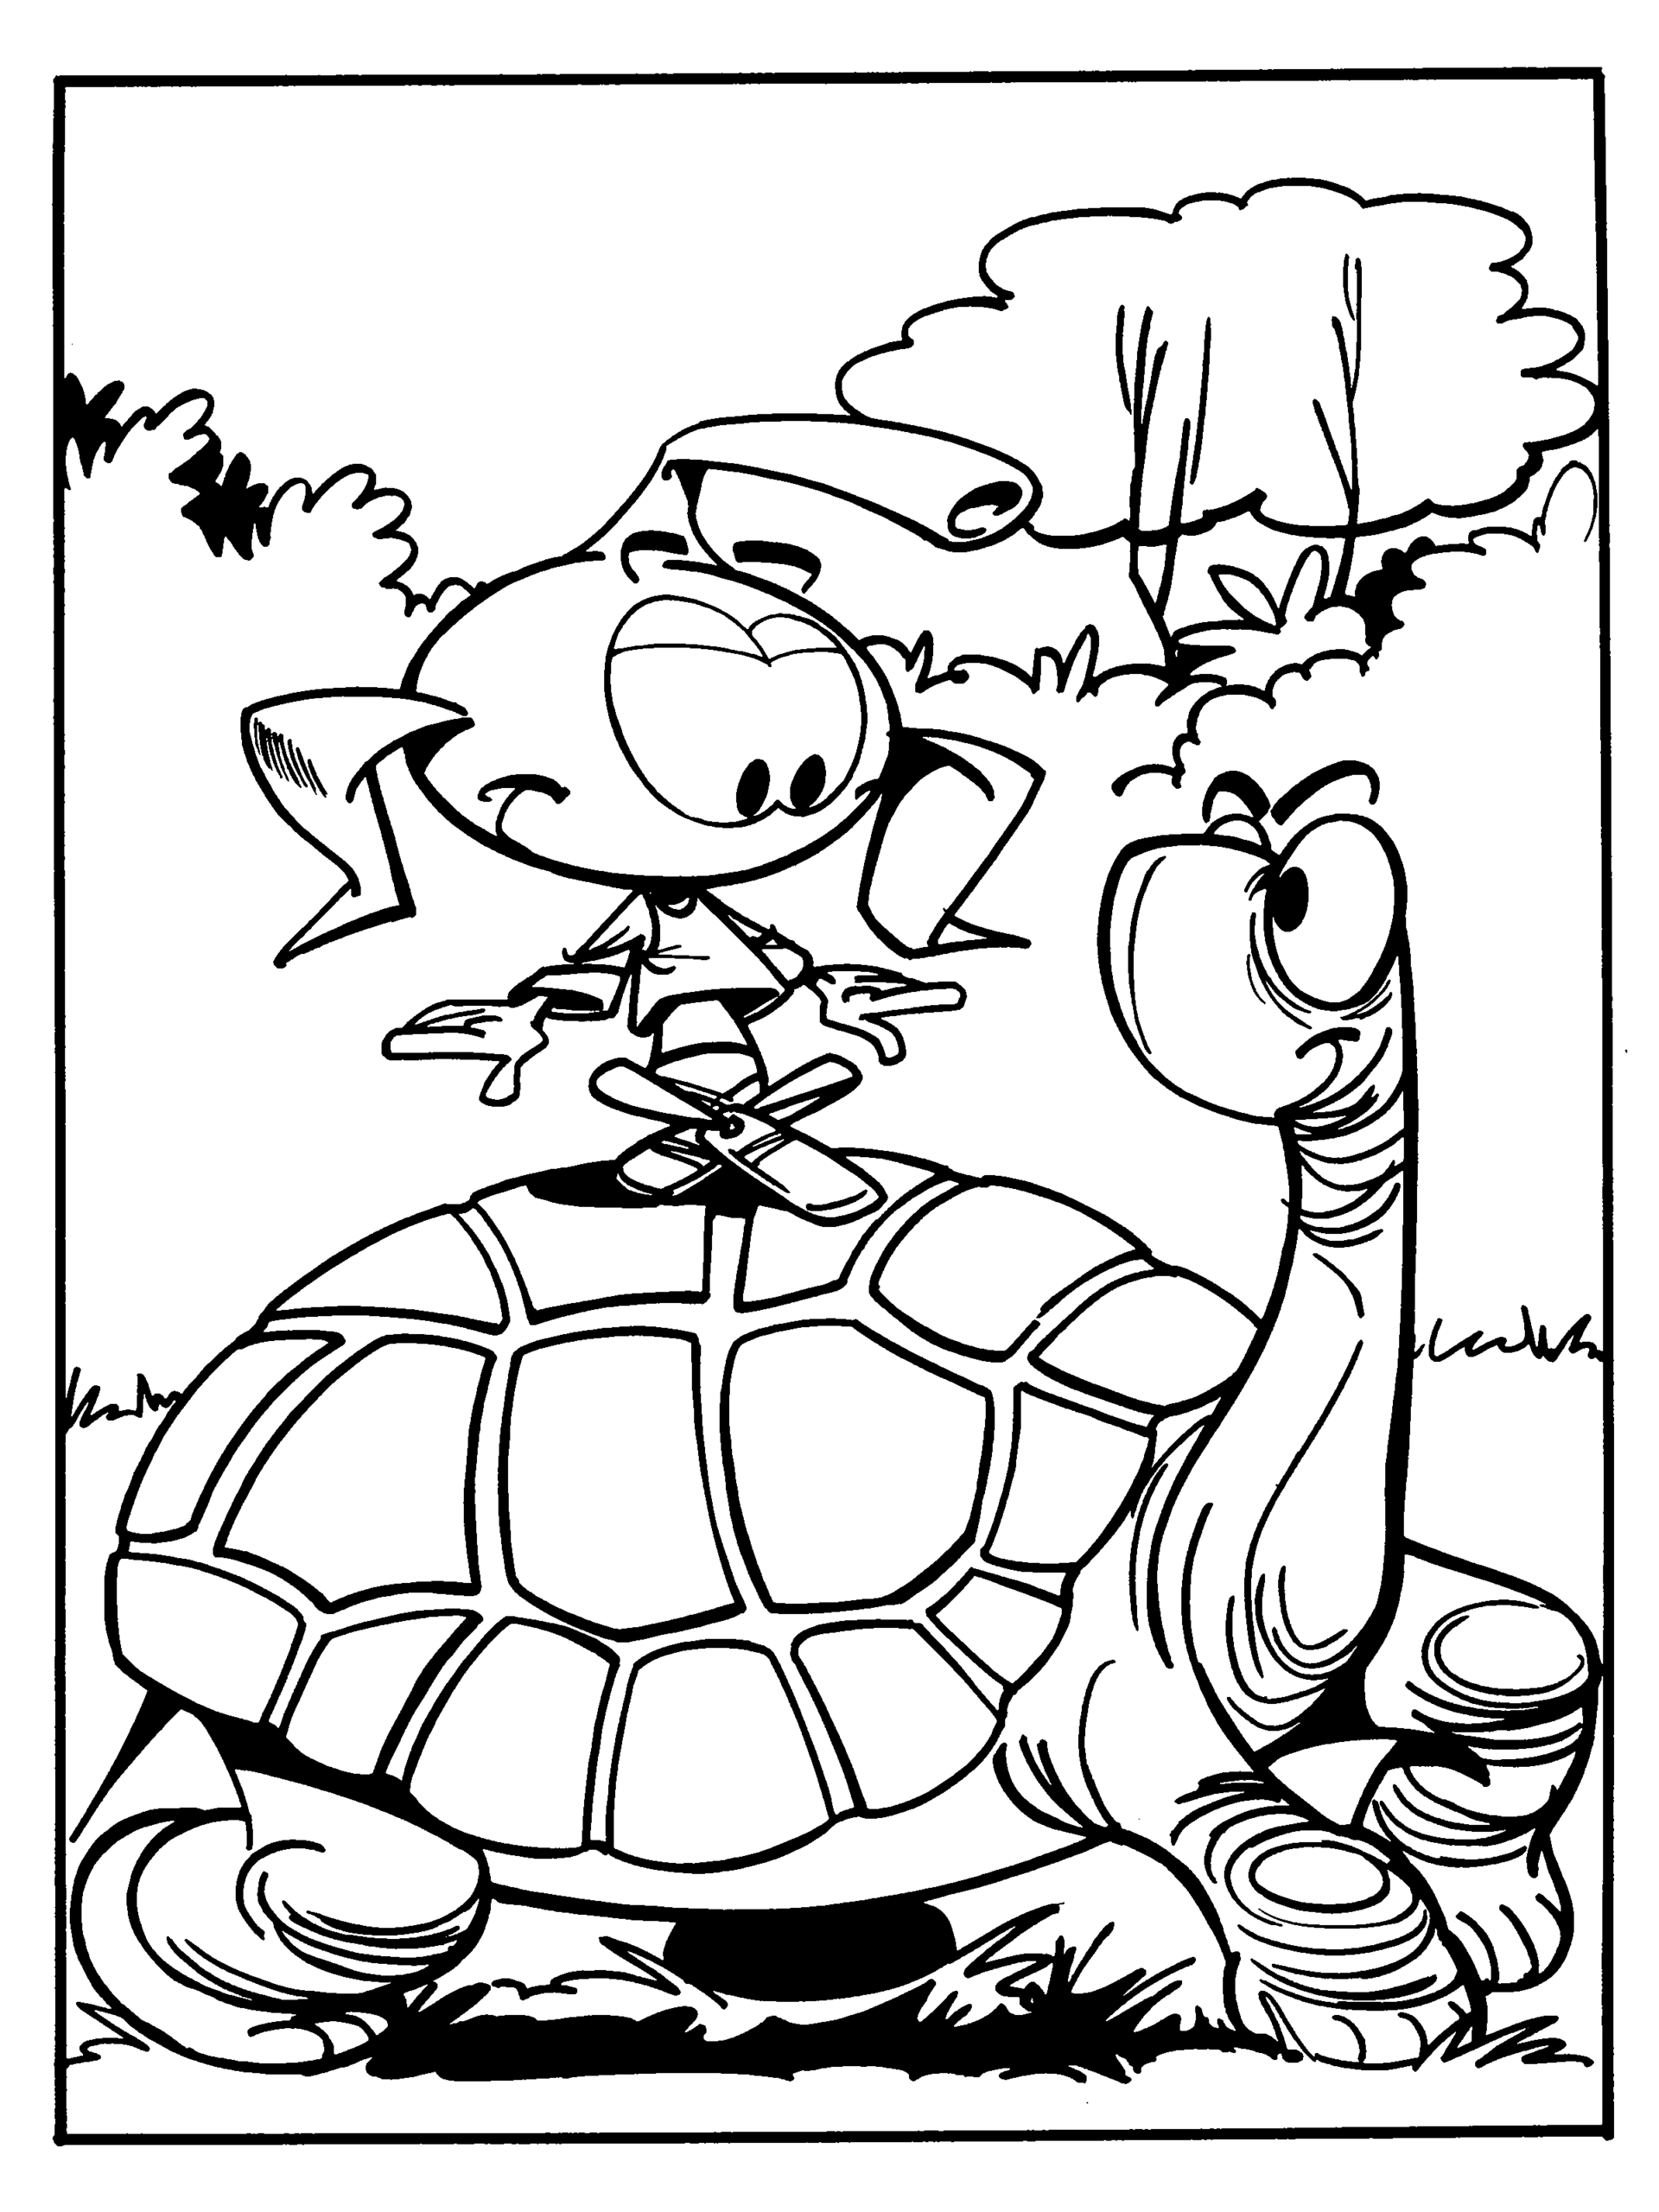 Snorks Coloring Pages TV Film snorks 3 Printable 2020 07663 Coloring4free